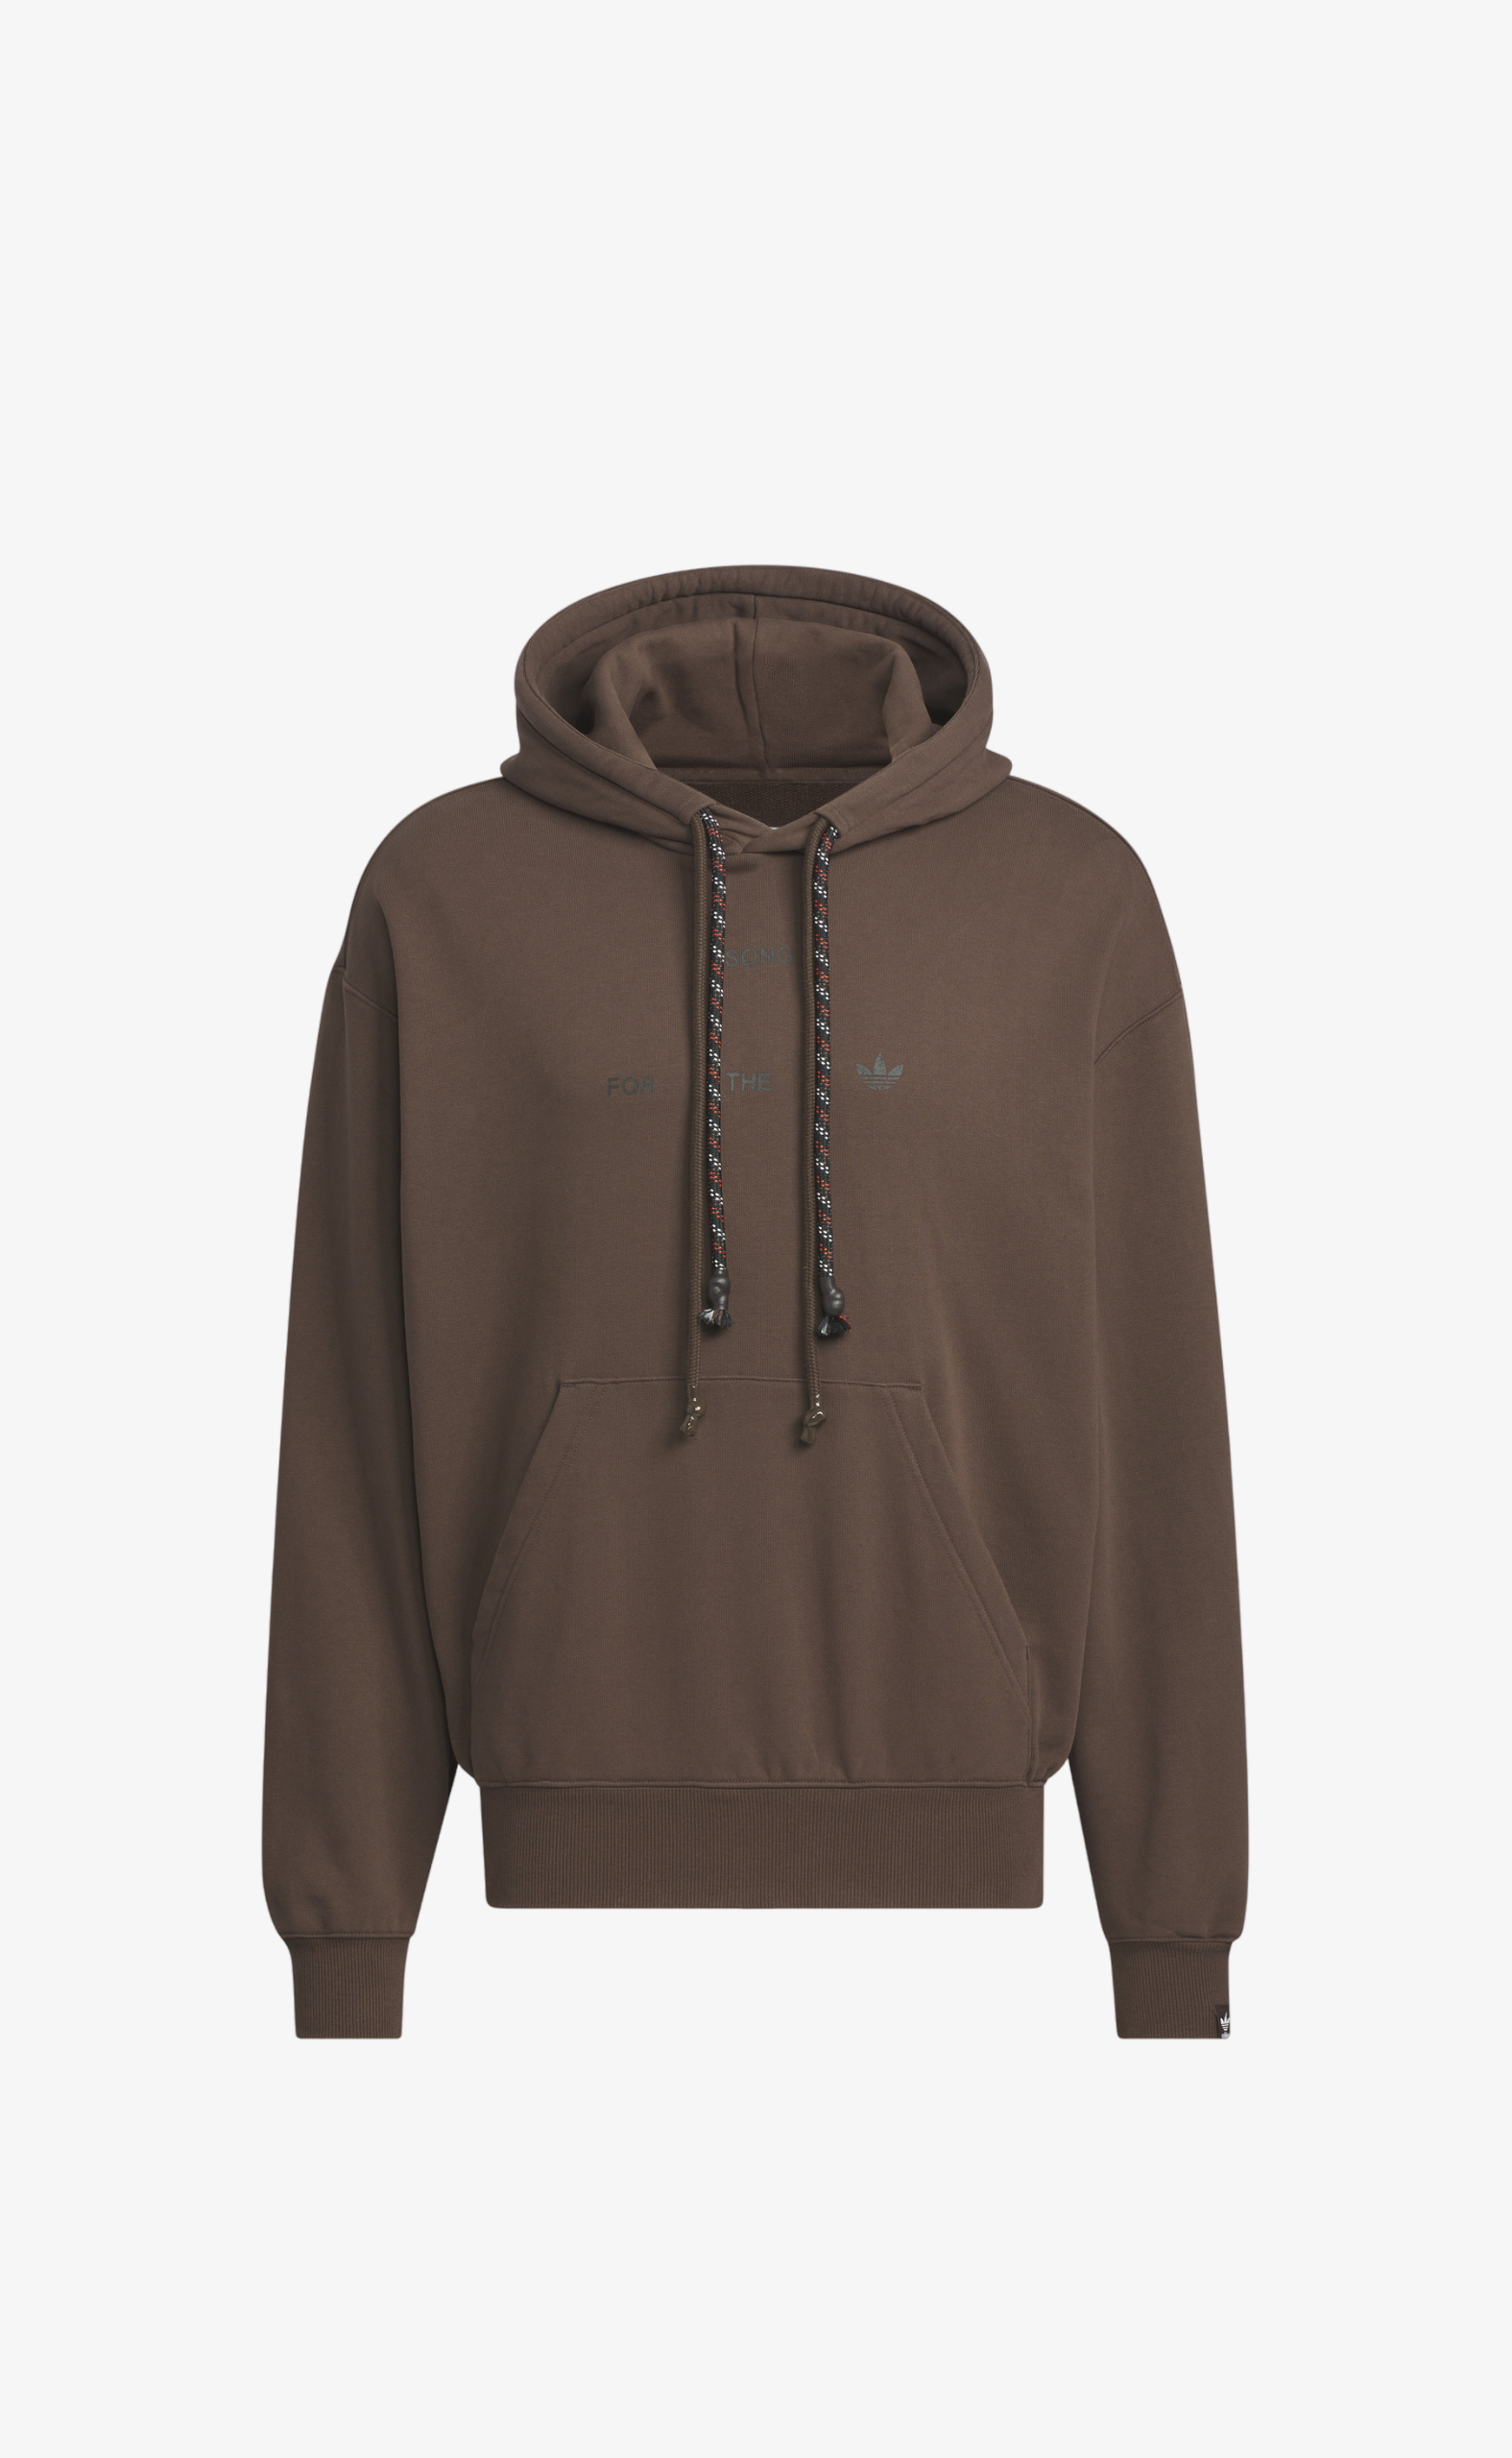 SONG FOR THE MUTE WINTER BROWN HOODIE